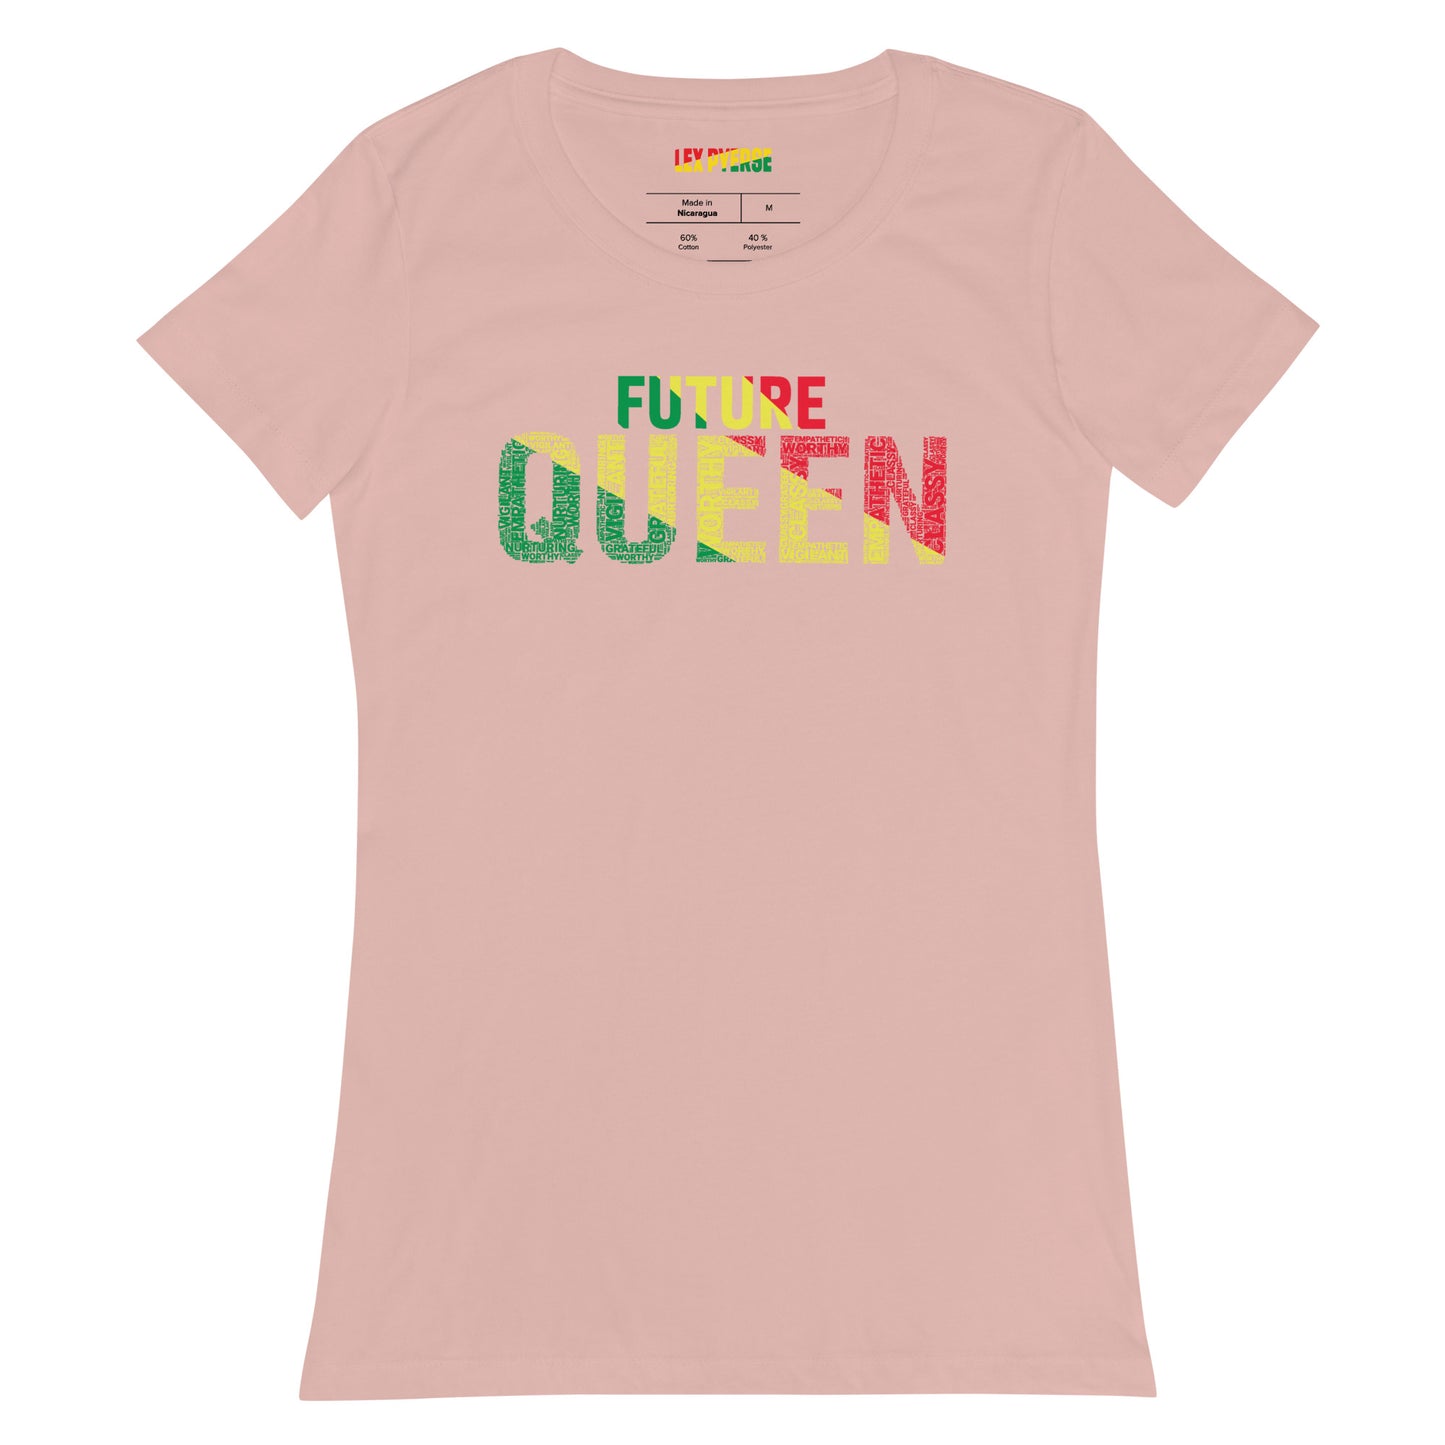 FUTURE QUEEN Women’s fitted t-shirt